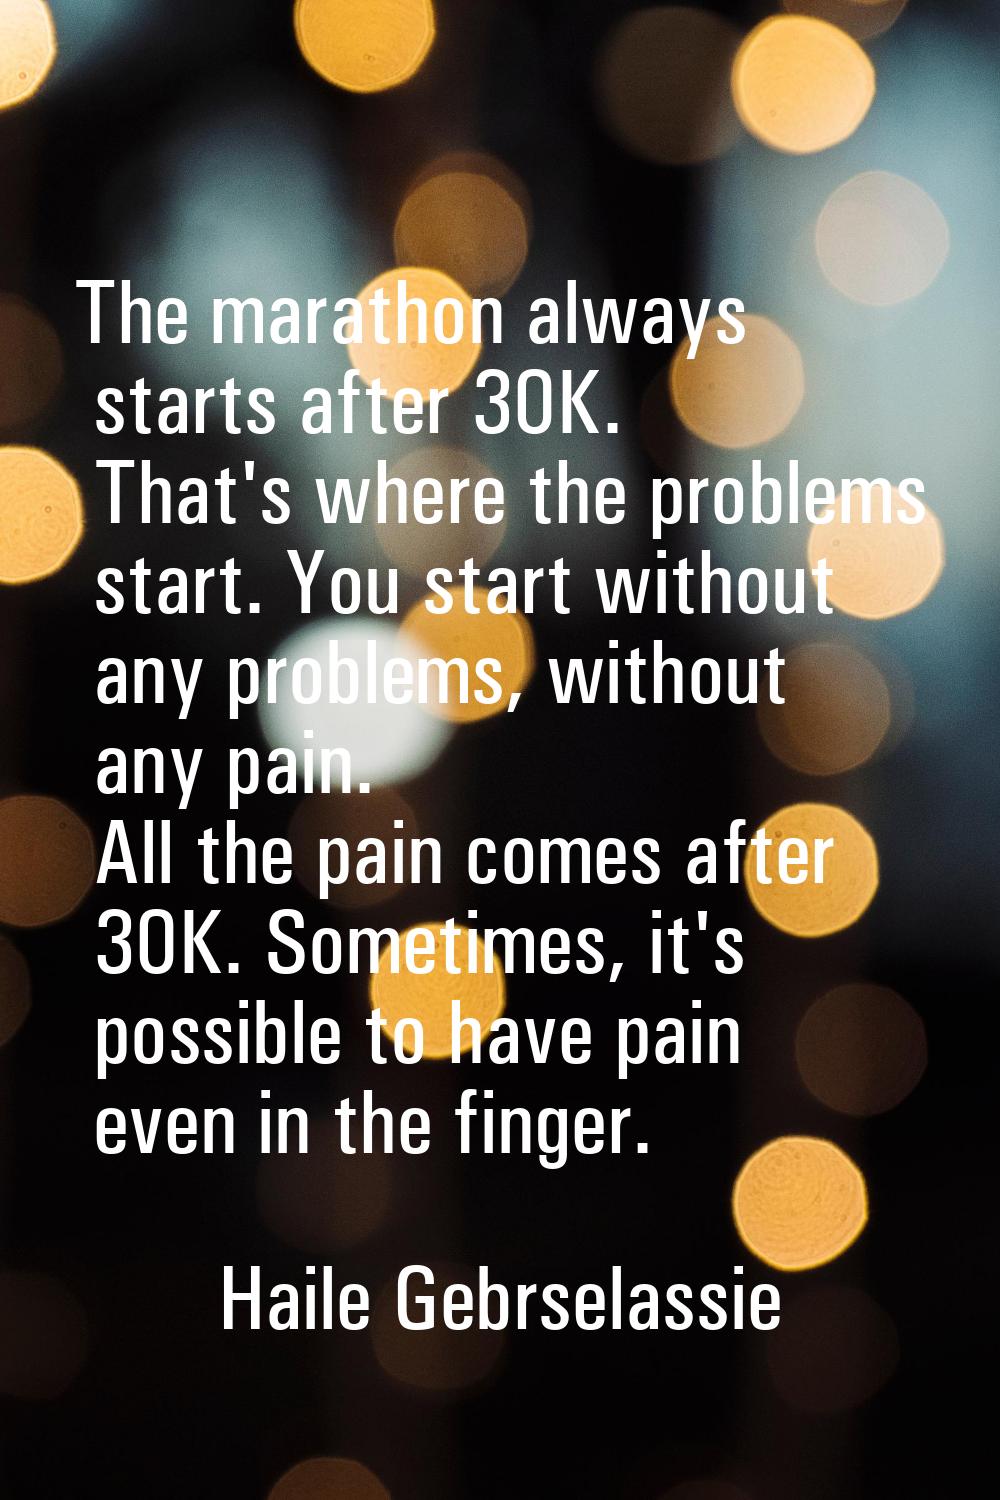 The marathon always starts after 30K. That's where the problems start. You start without any proble